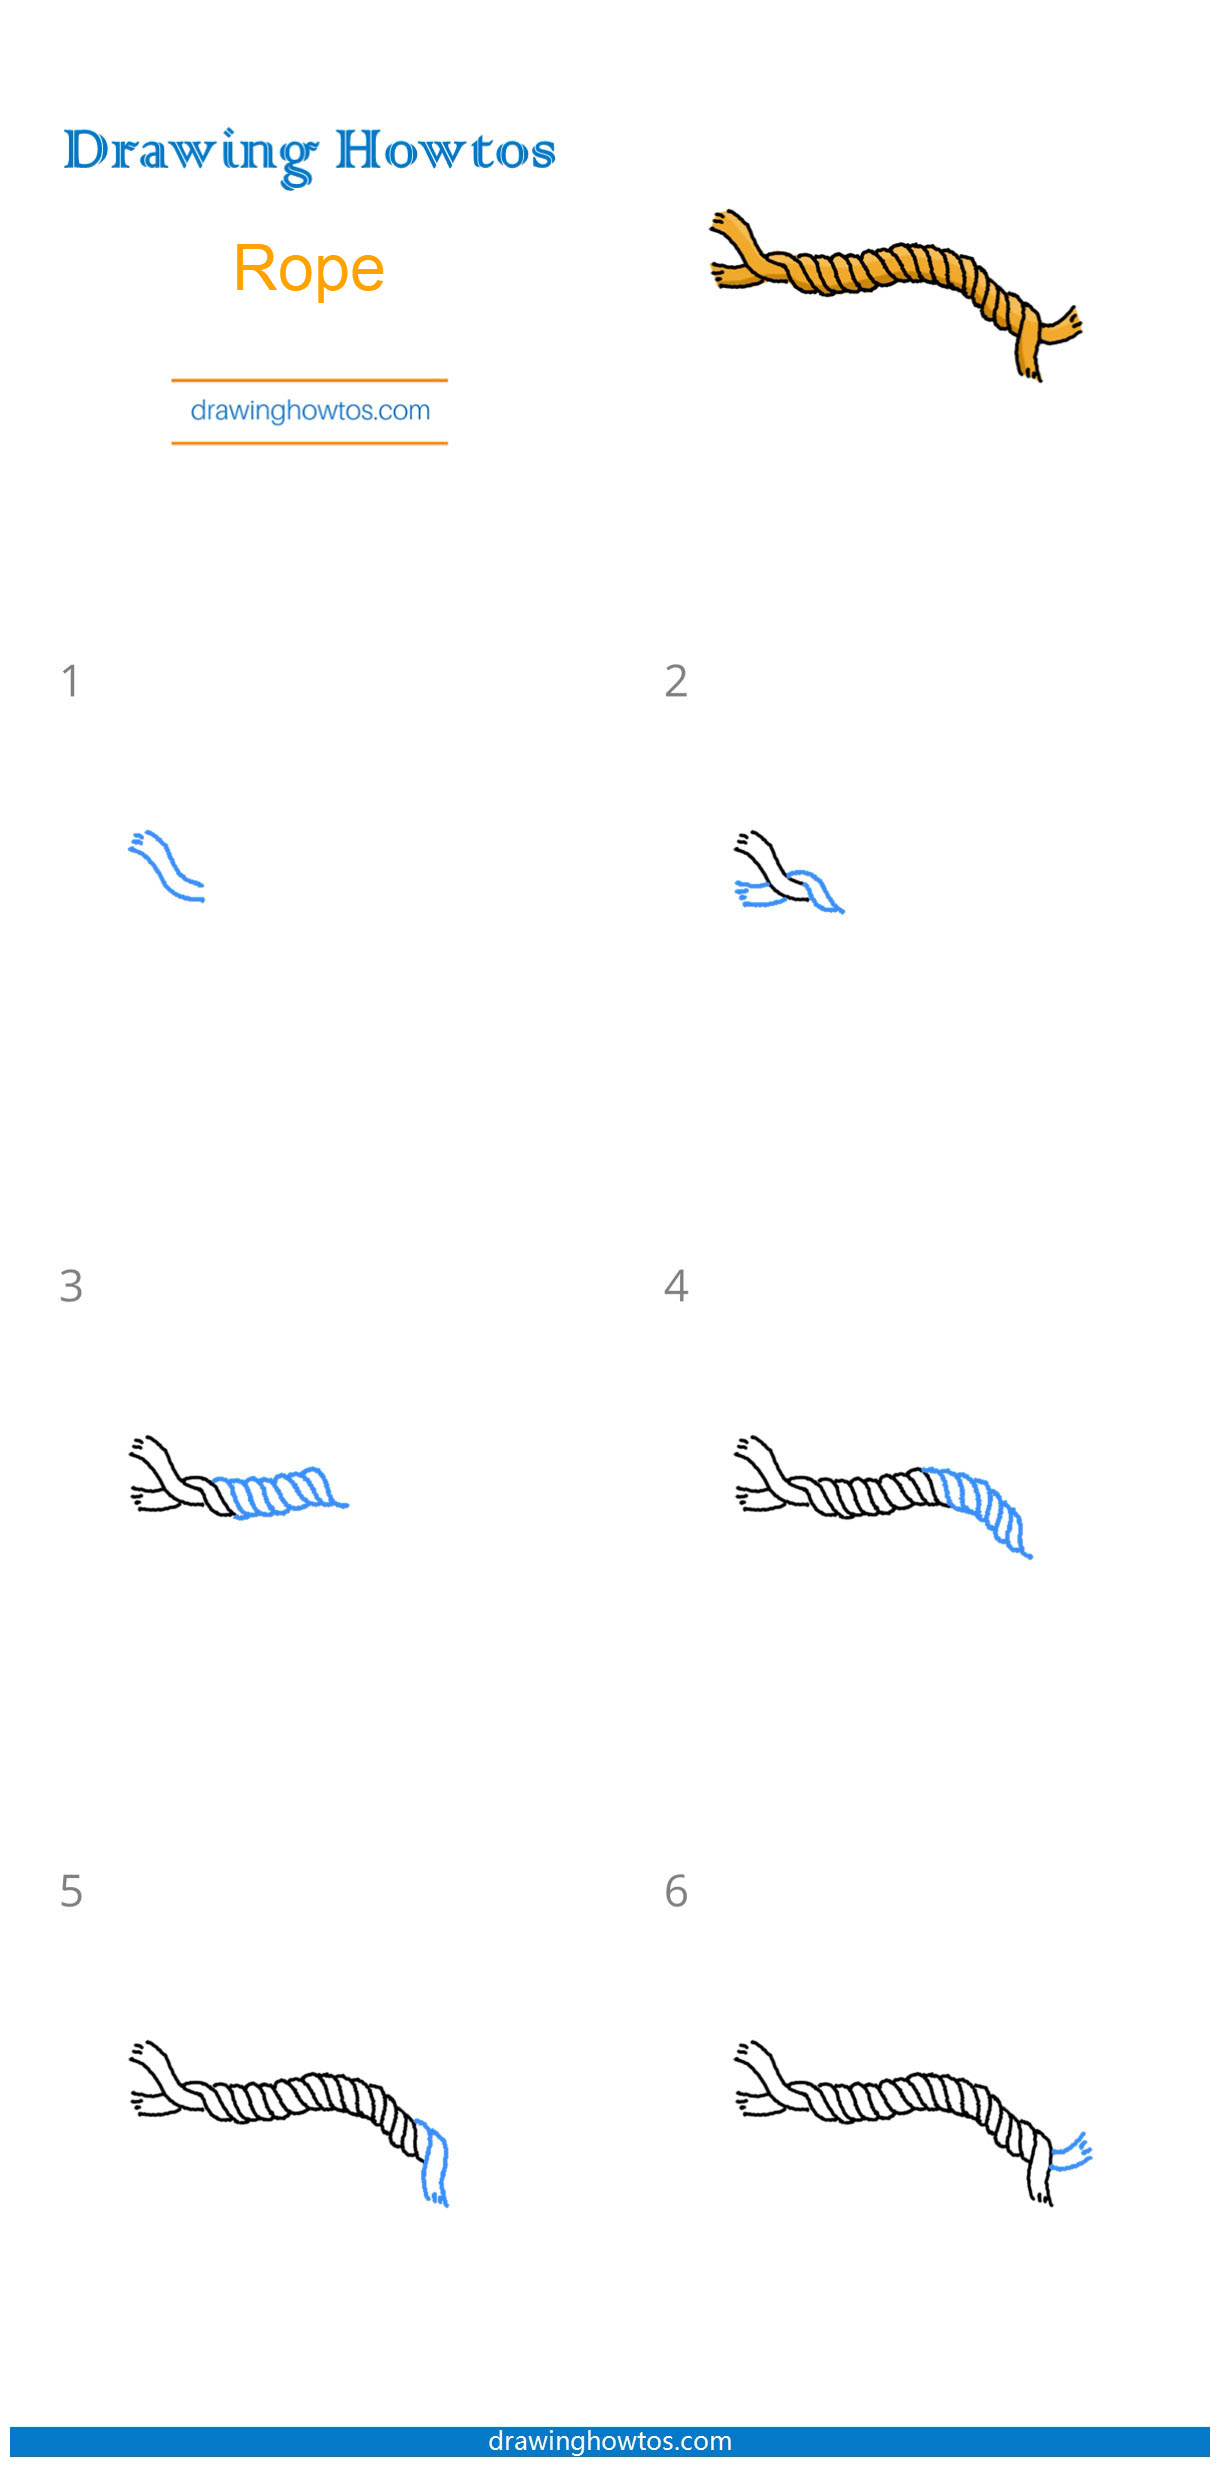 How to Draw a Rope Step by Step